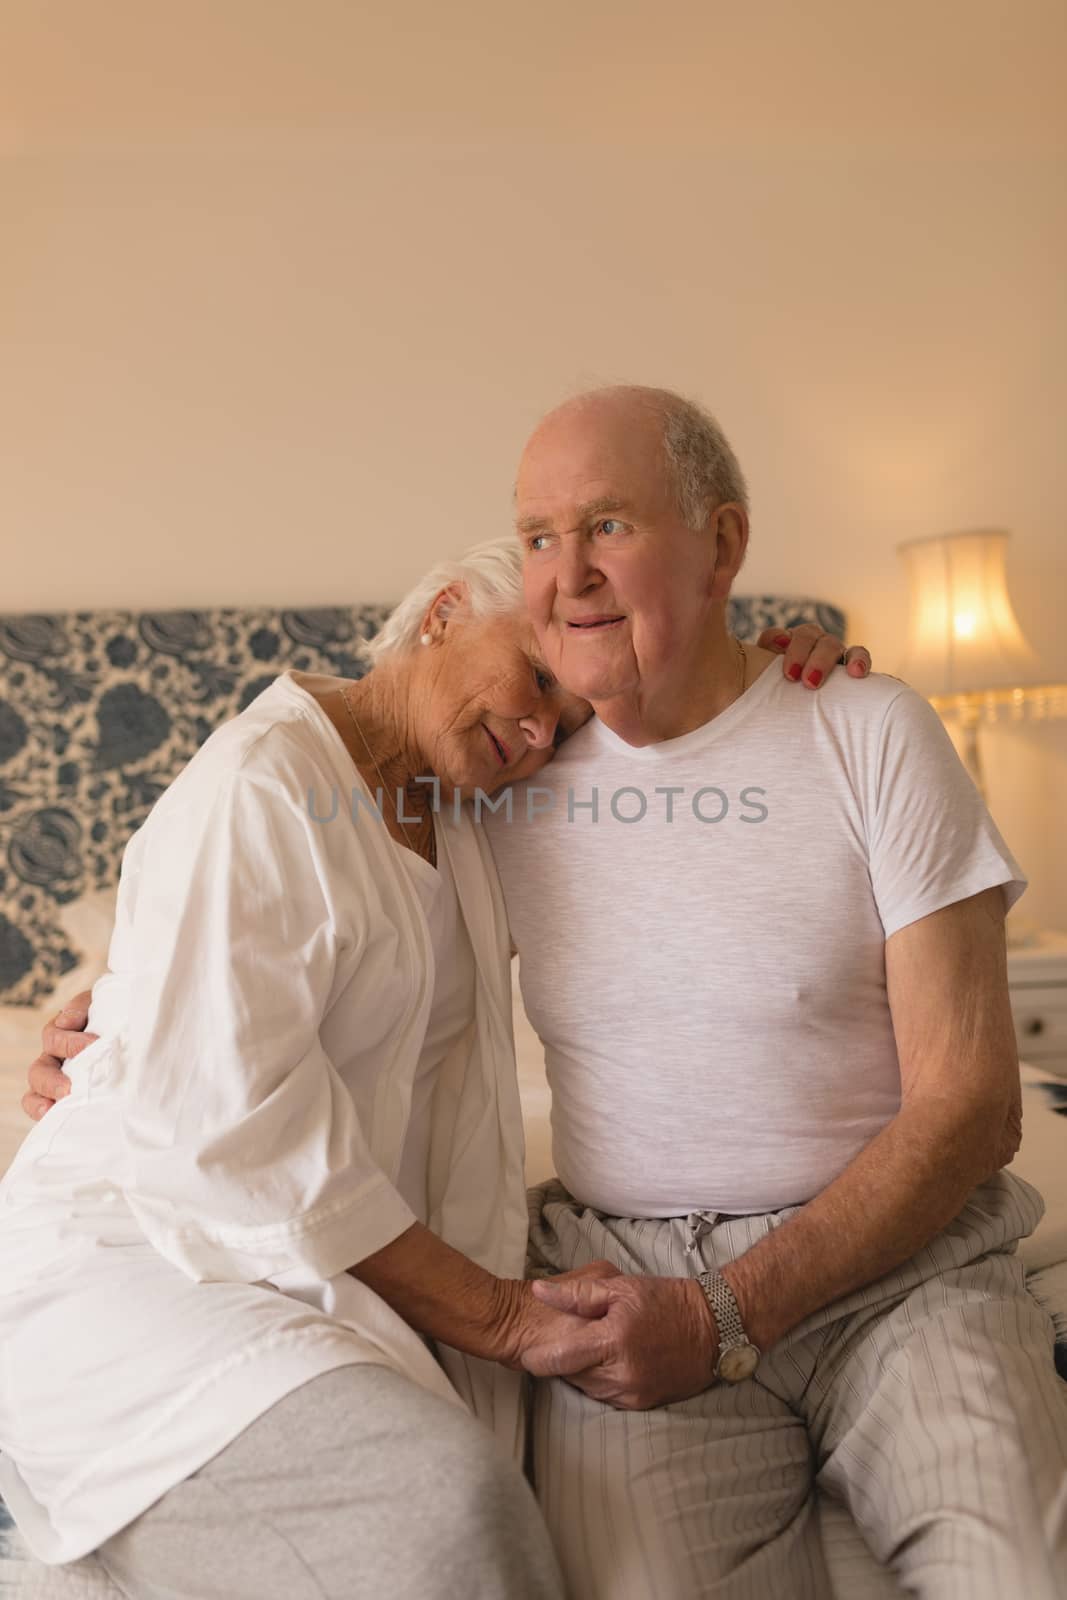 Front view of happy senior couple embracing each other relaxing in bedroom at home